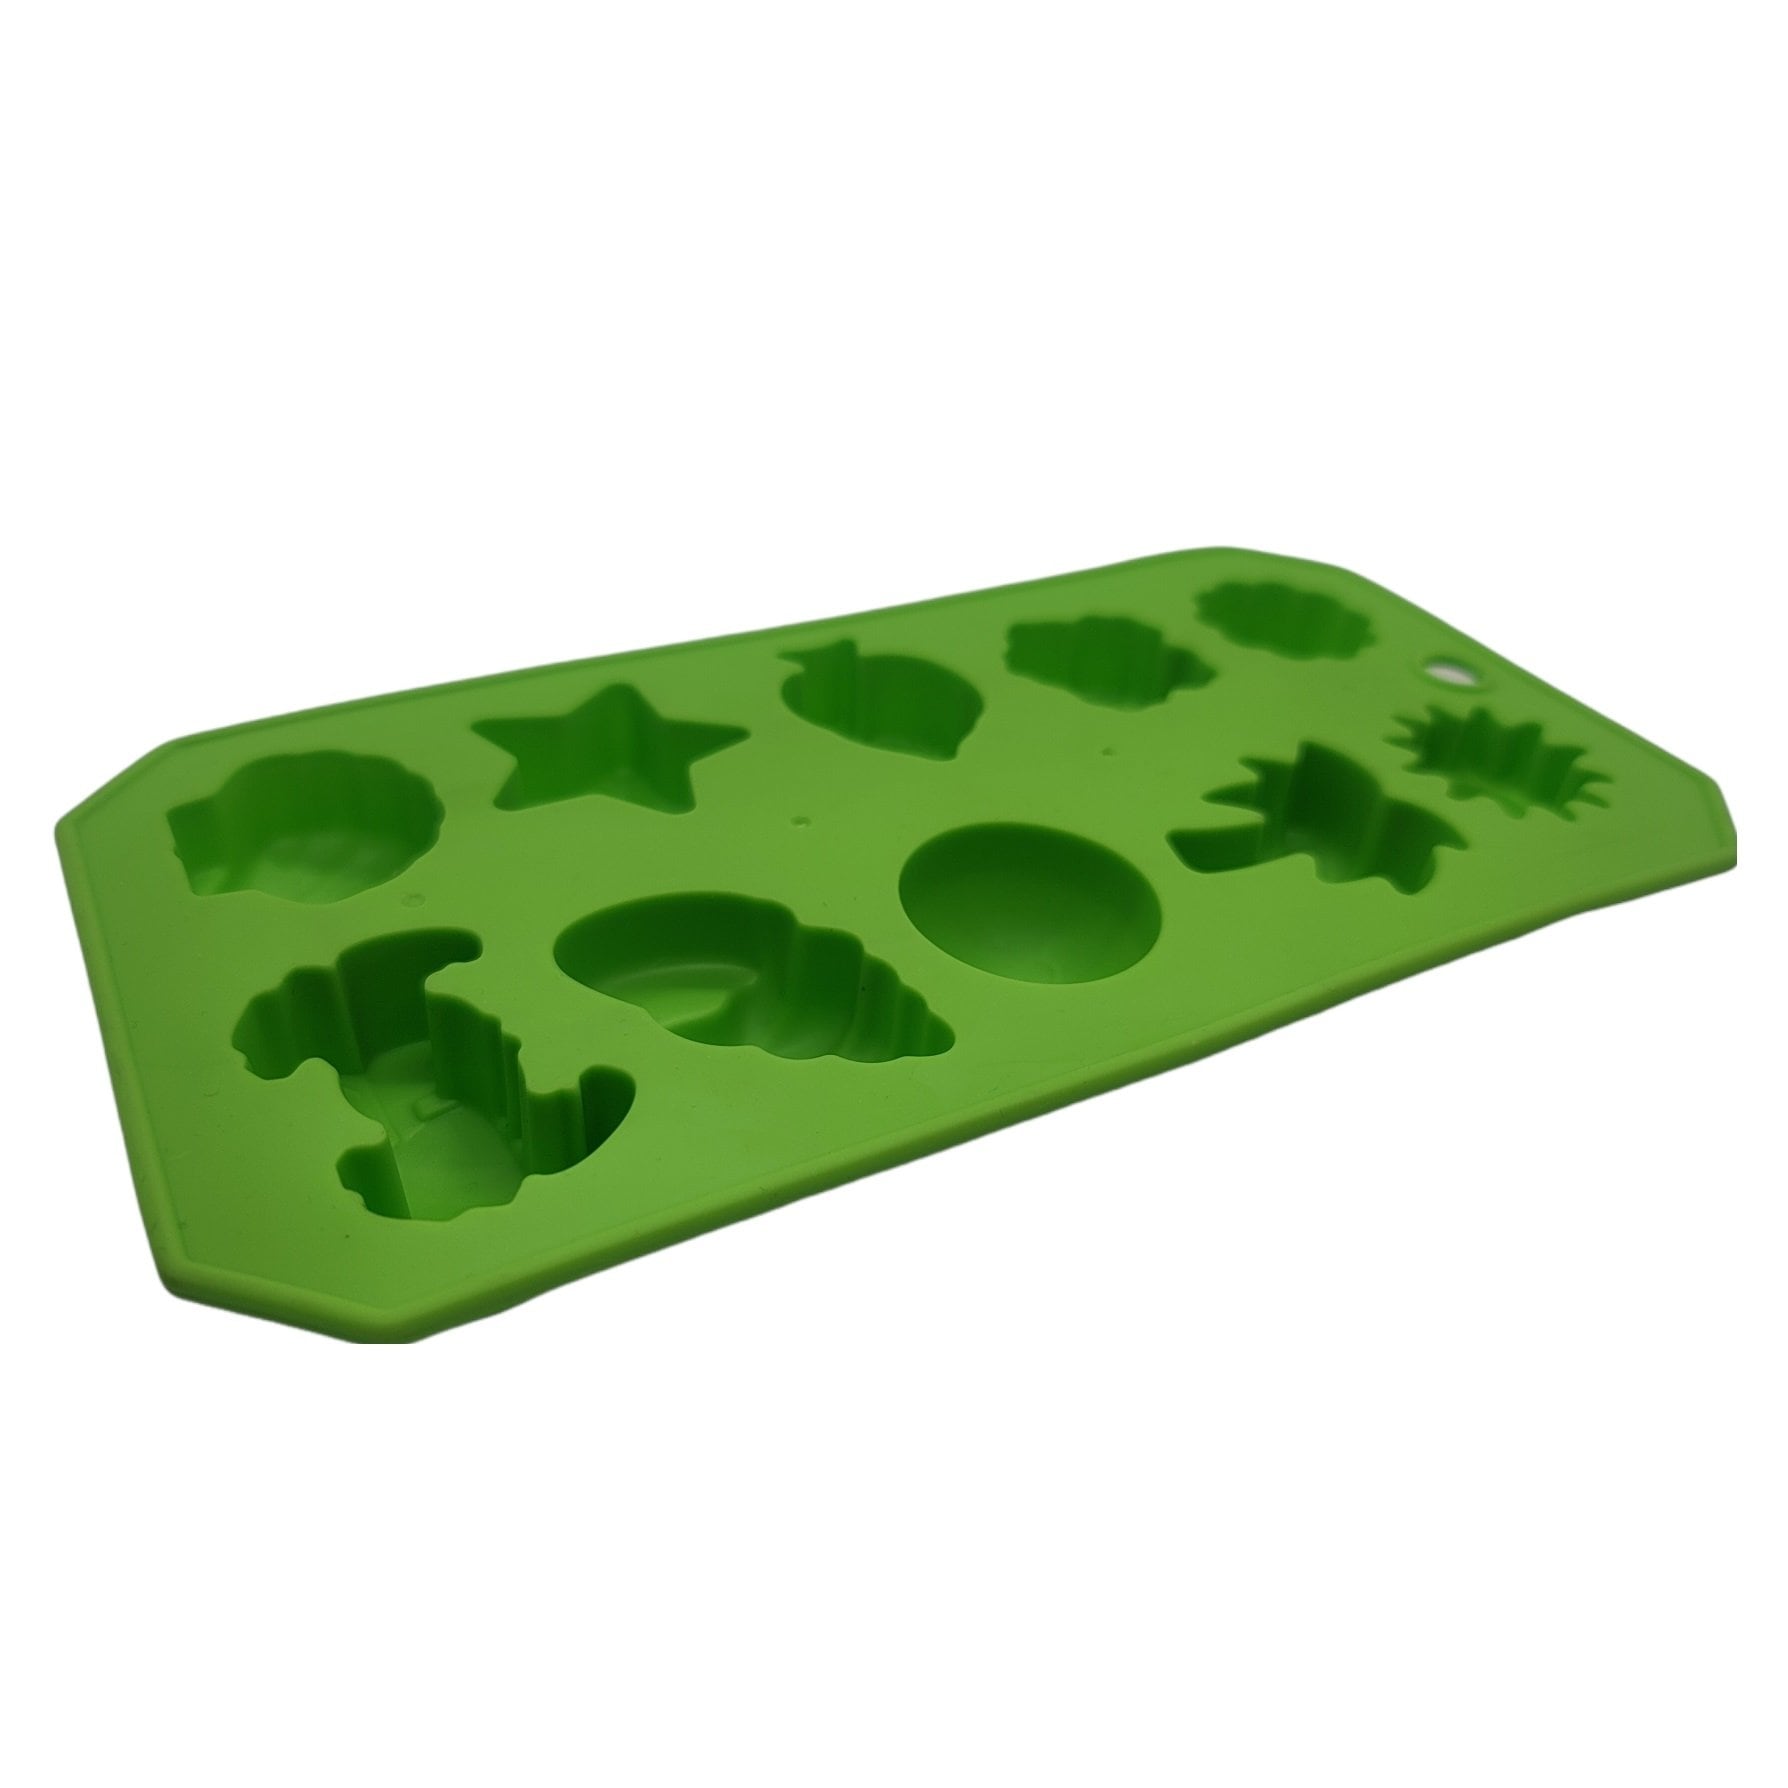 https://ak1.ostkcdn.com/images/products/is/images/direct/1eb3e821d4fcfa7a90c8aa555e69c2b4edbda53f/Chef-Craft-Flexible-Thermoplastic-10-Cube-Ice-Cube-Tray---Fun-Beach-Shapes.jpg